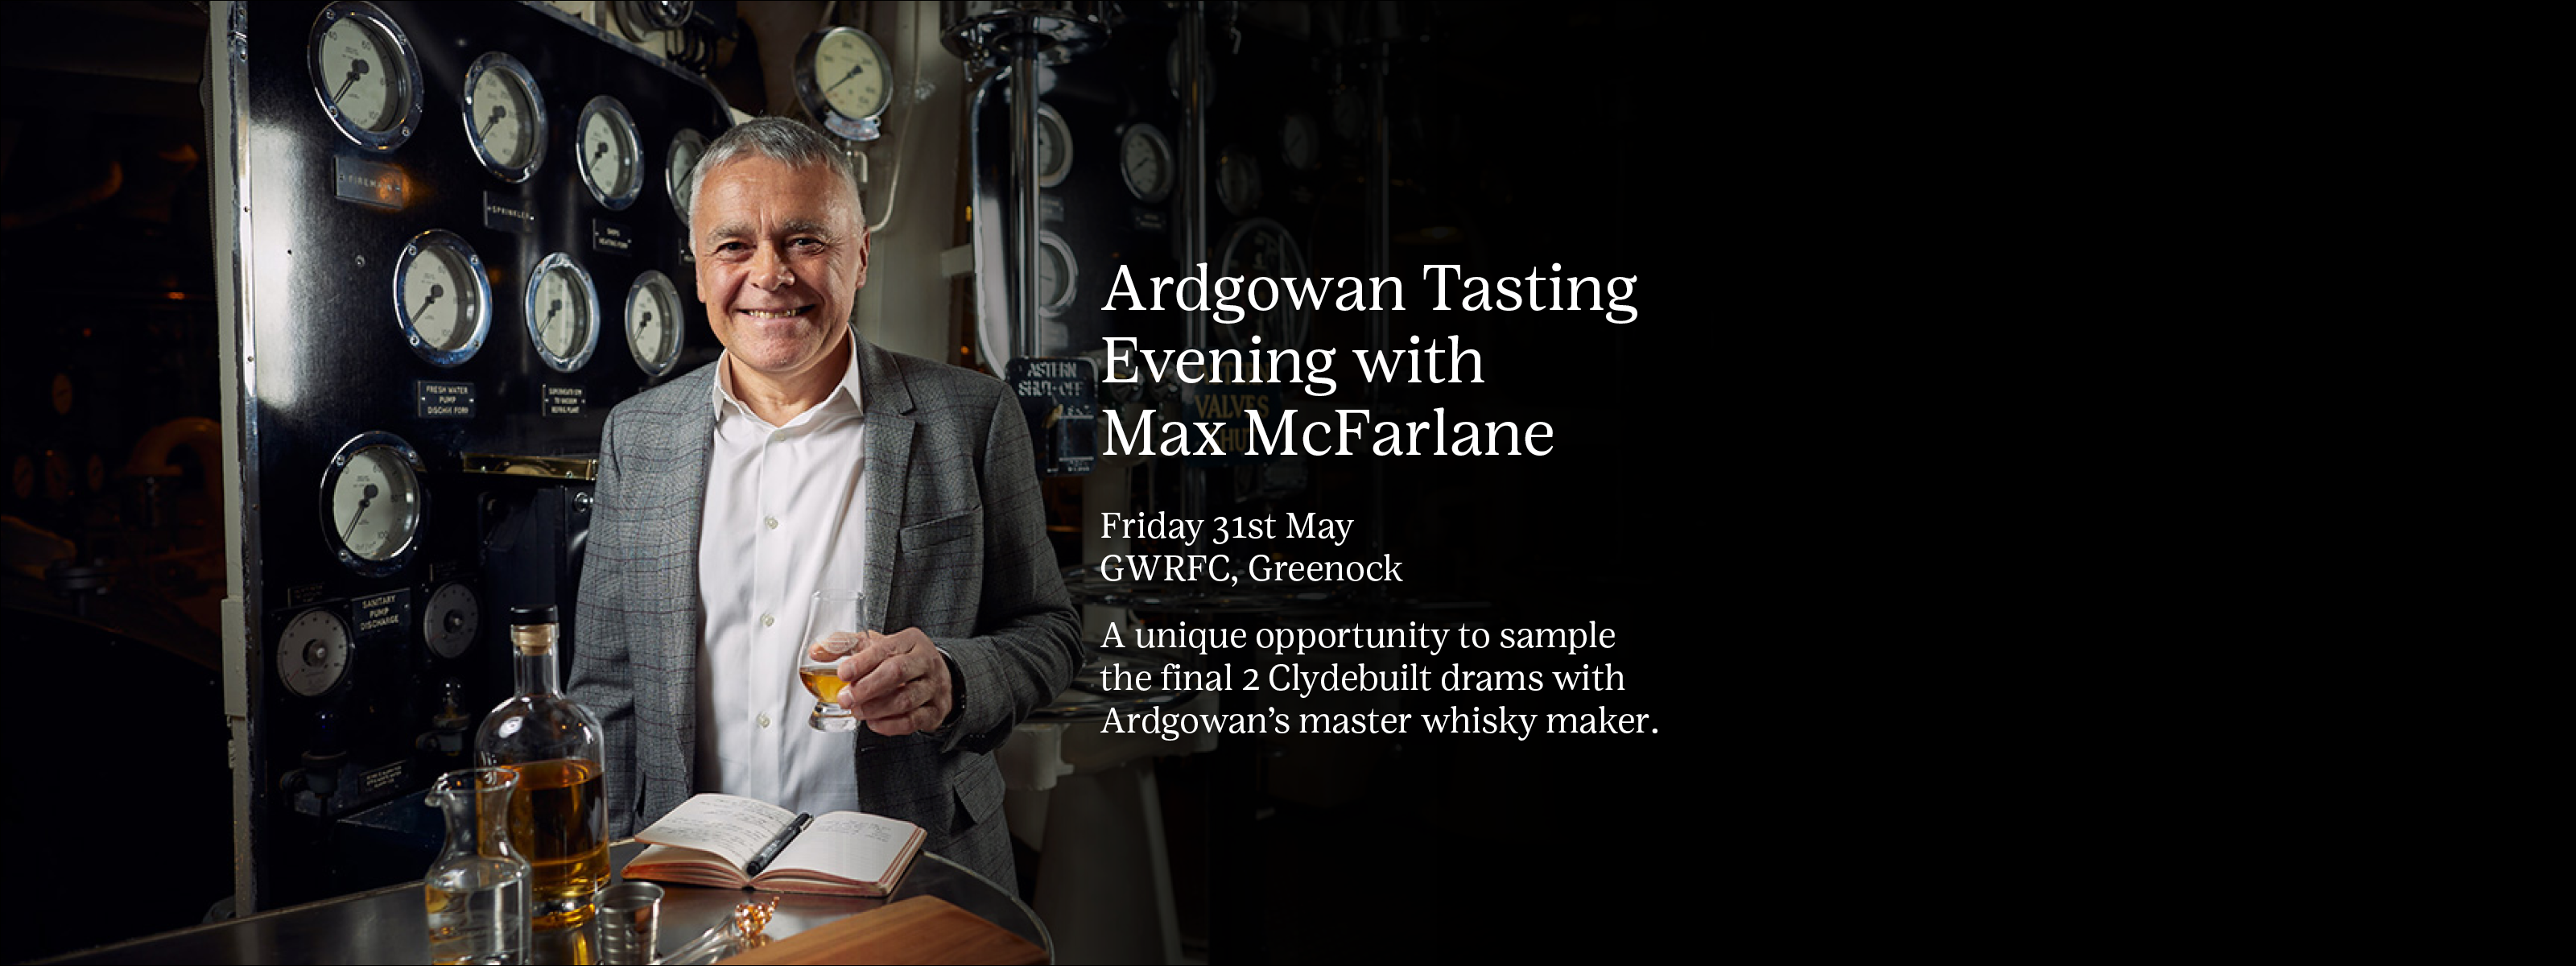 Photo of max McFarlane with whisky bottle, book and glasses in a distillery. Text says - Ardgowan Tasting Evening with  Max McFarlane Friday 31st May GWRFC, Greenock A unique opportunity to sample the final 2 Clydebuilt drams with Ardgowan’s master whisky maker.